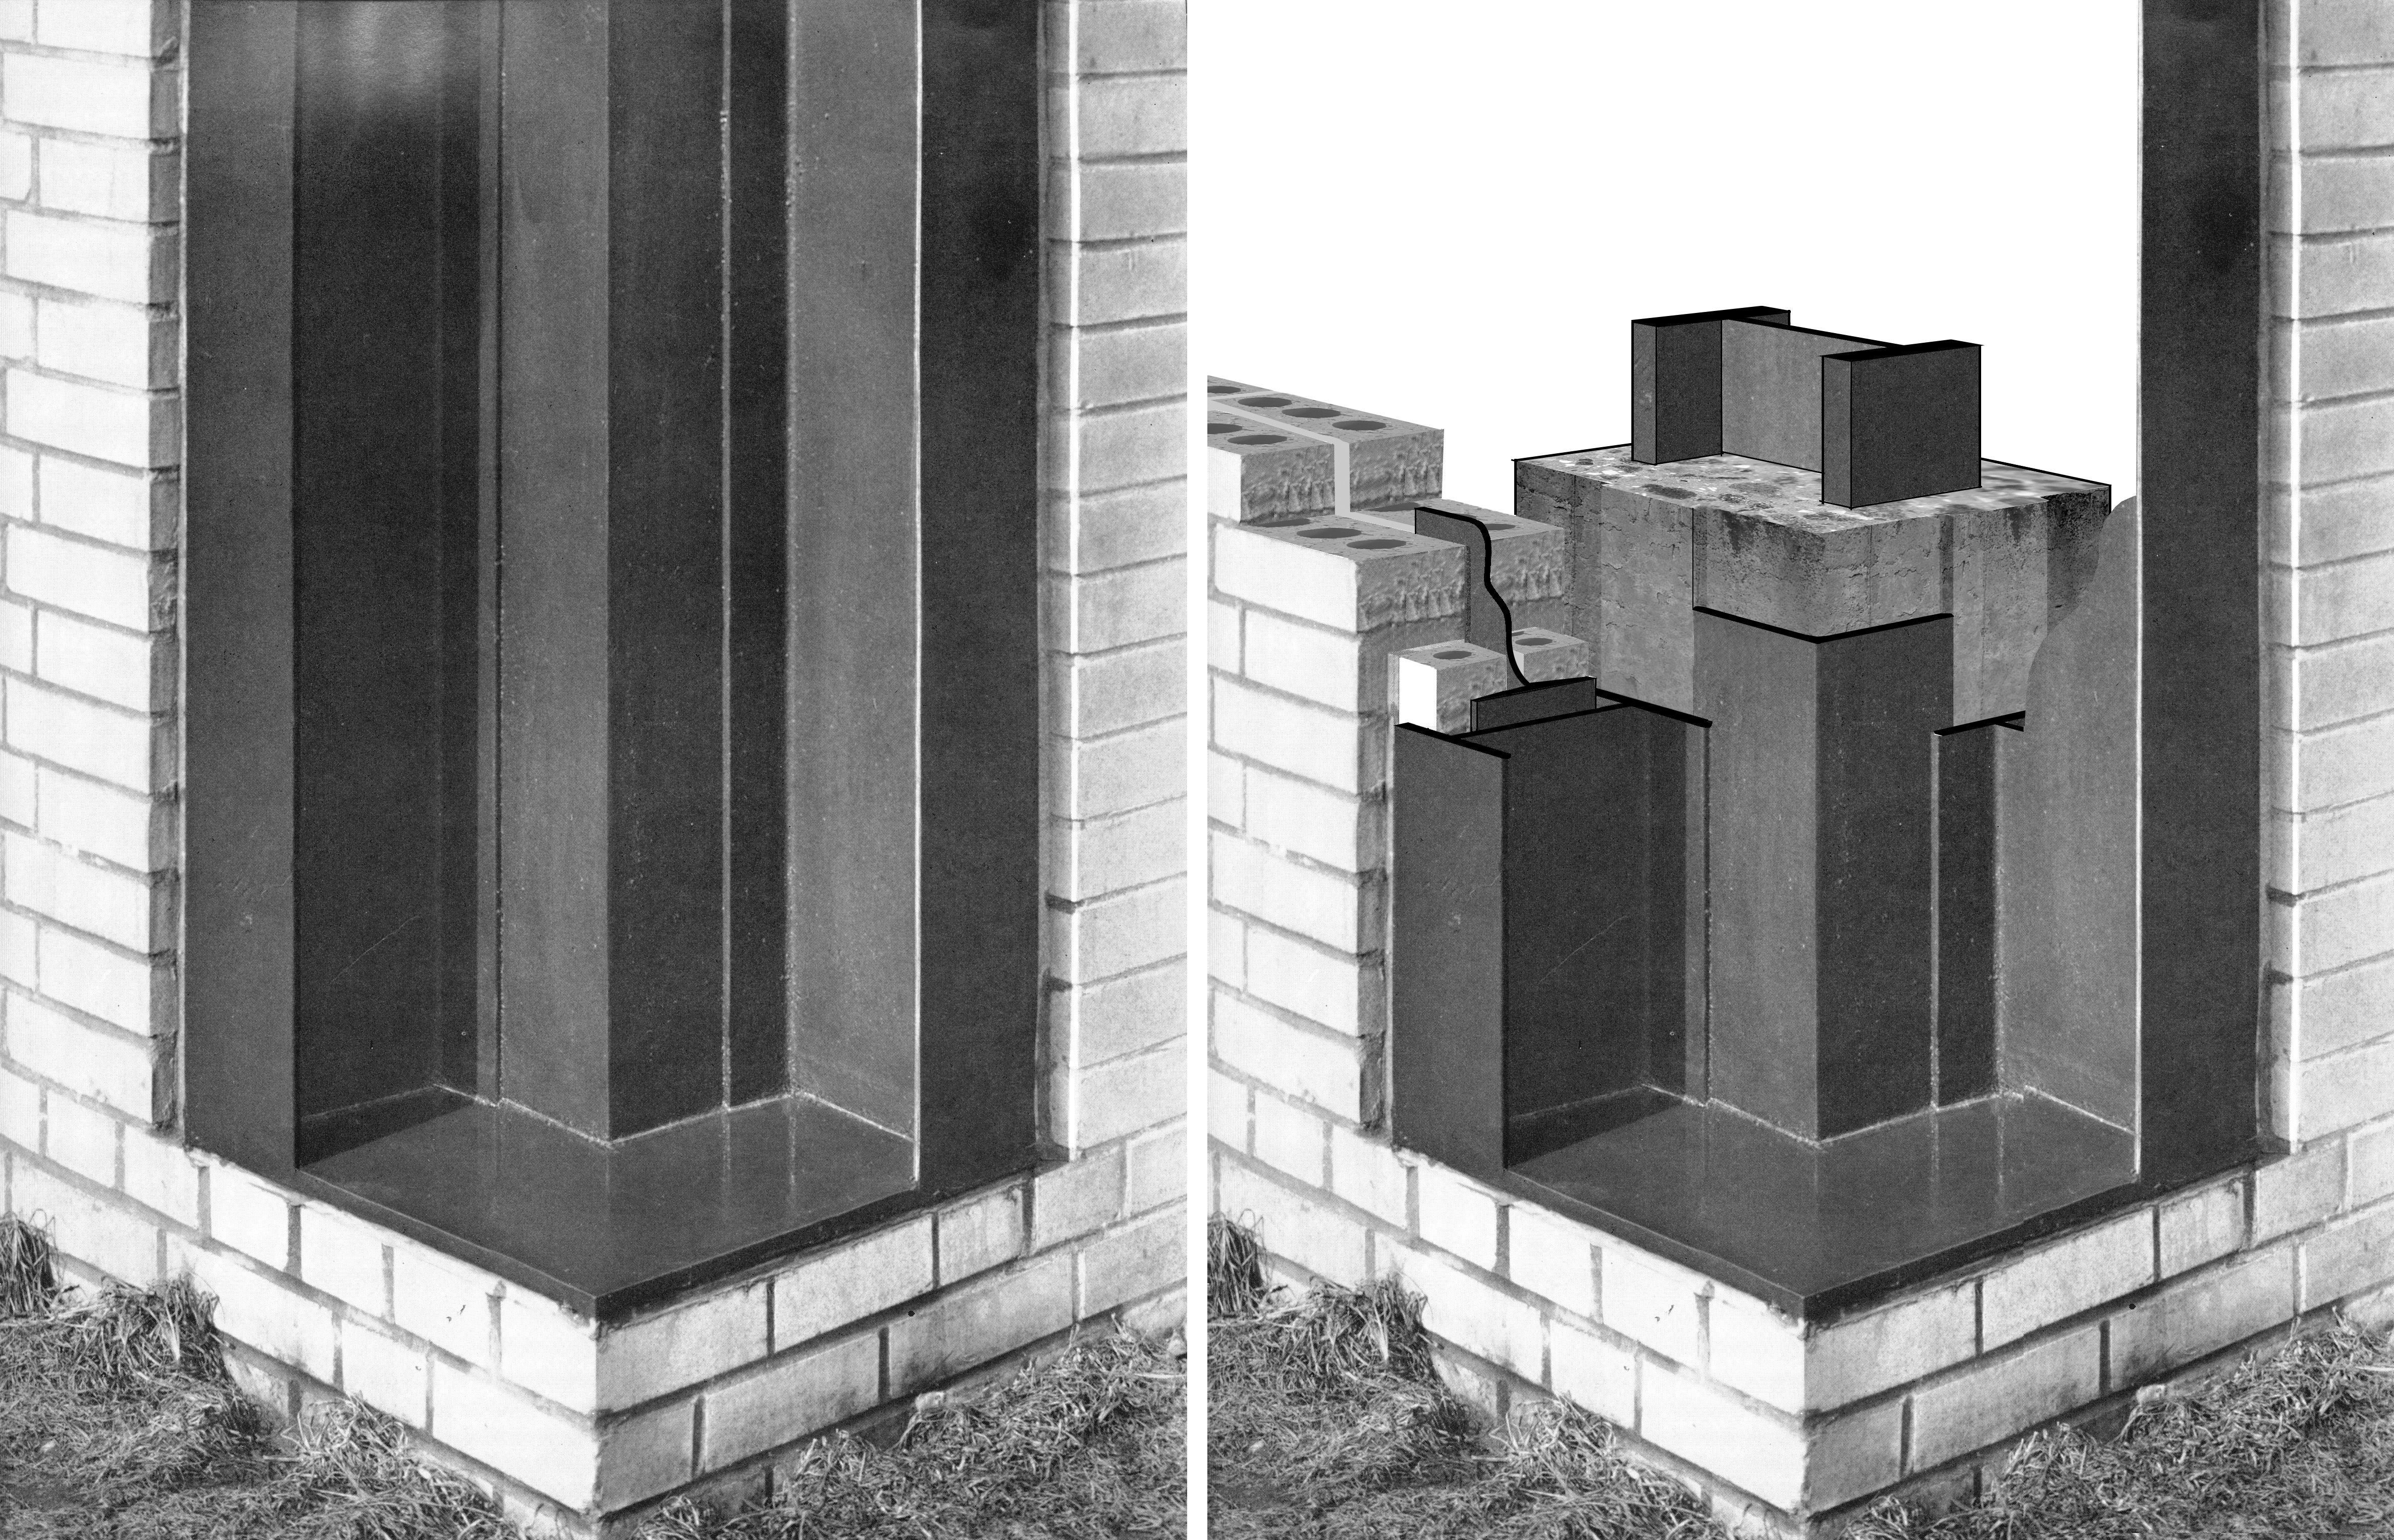 Corner image of Mies's IIT building compared to a cut-away version showing the actual steel column encased in concrete which is, in turn, covered with steel sheeting.